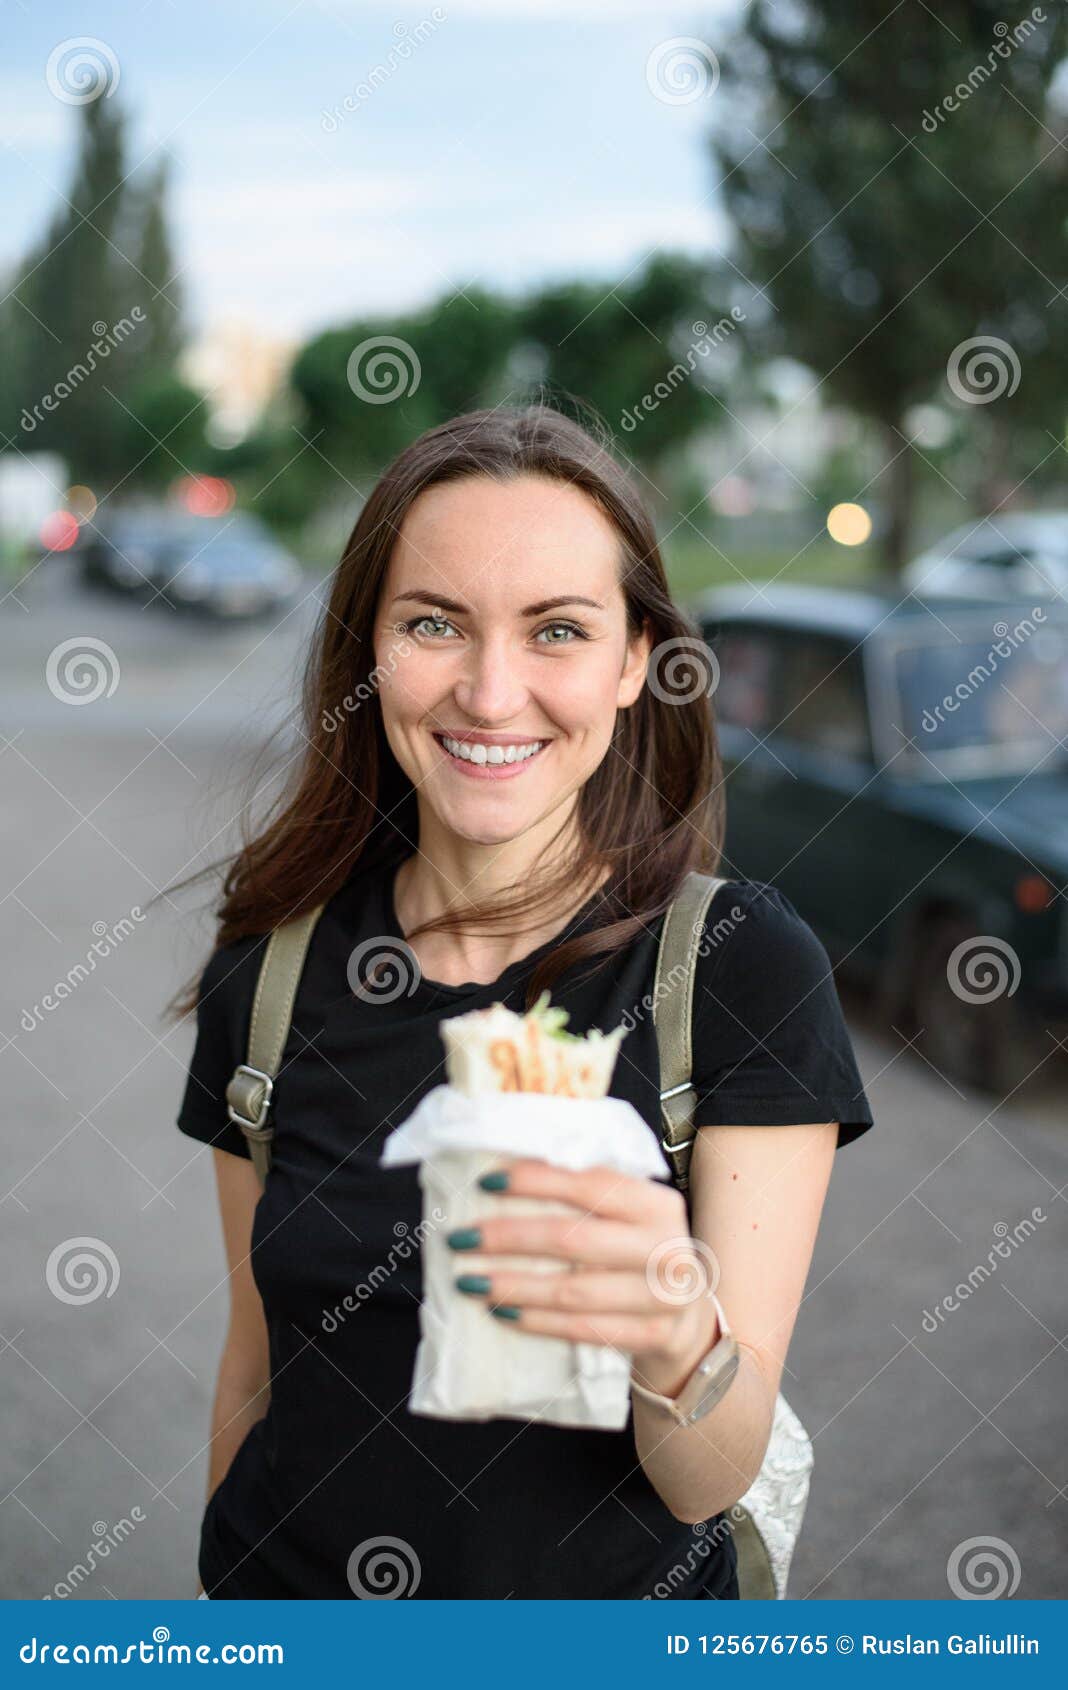 The Brunette Smiles Widely Holds Fast Food In Her Hand Stock Image Image Of Sandwich Doner